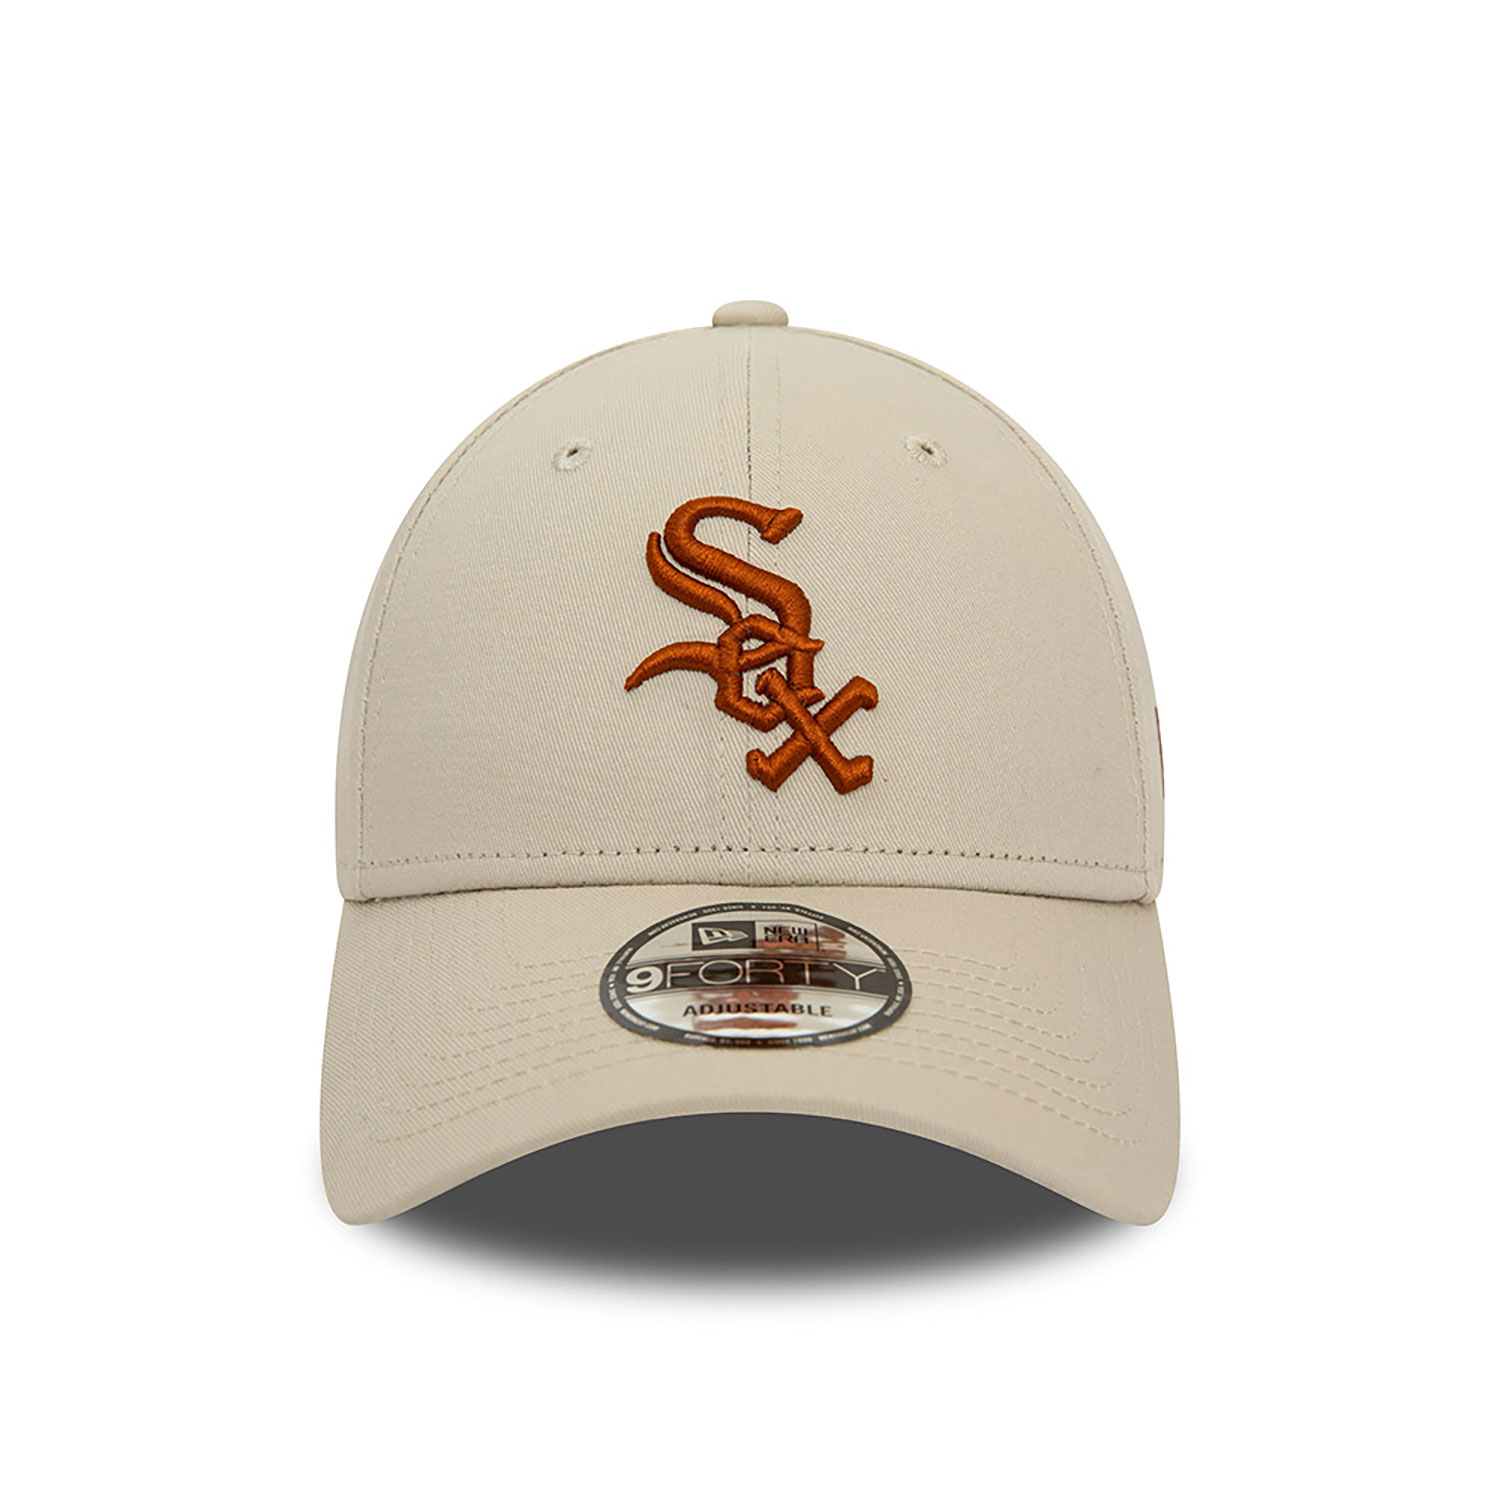 Chicago White Sox League Essential Stone 9FORTY Adjustable Cap